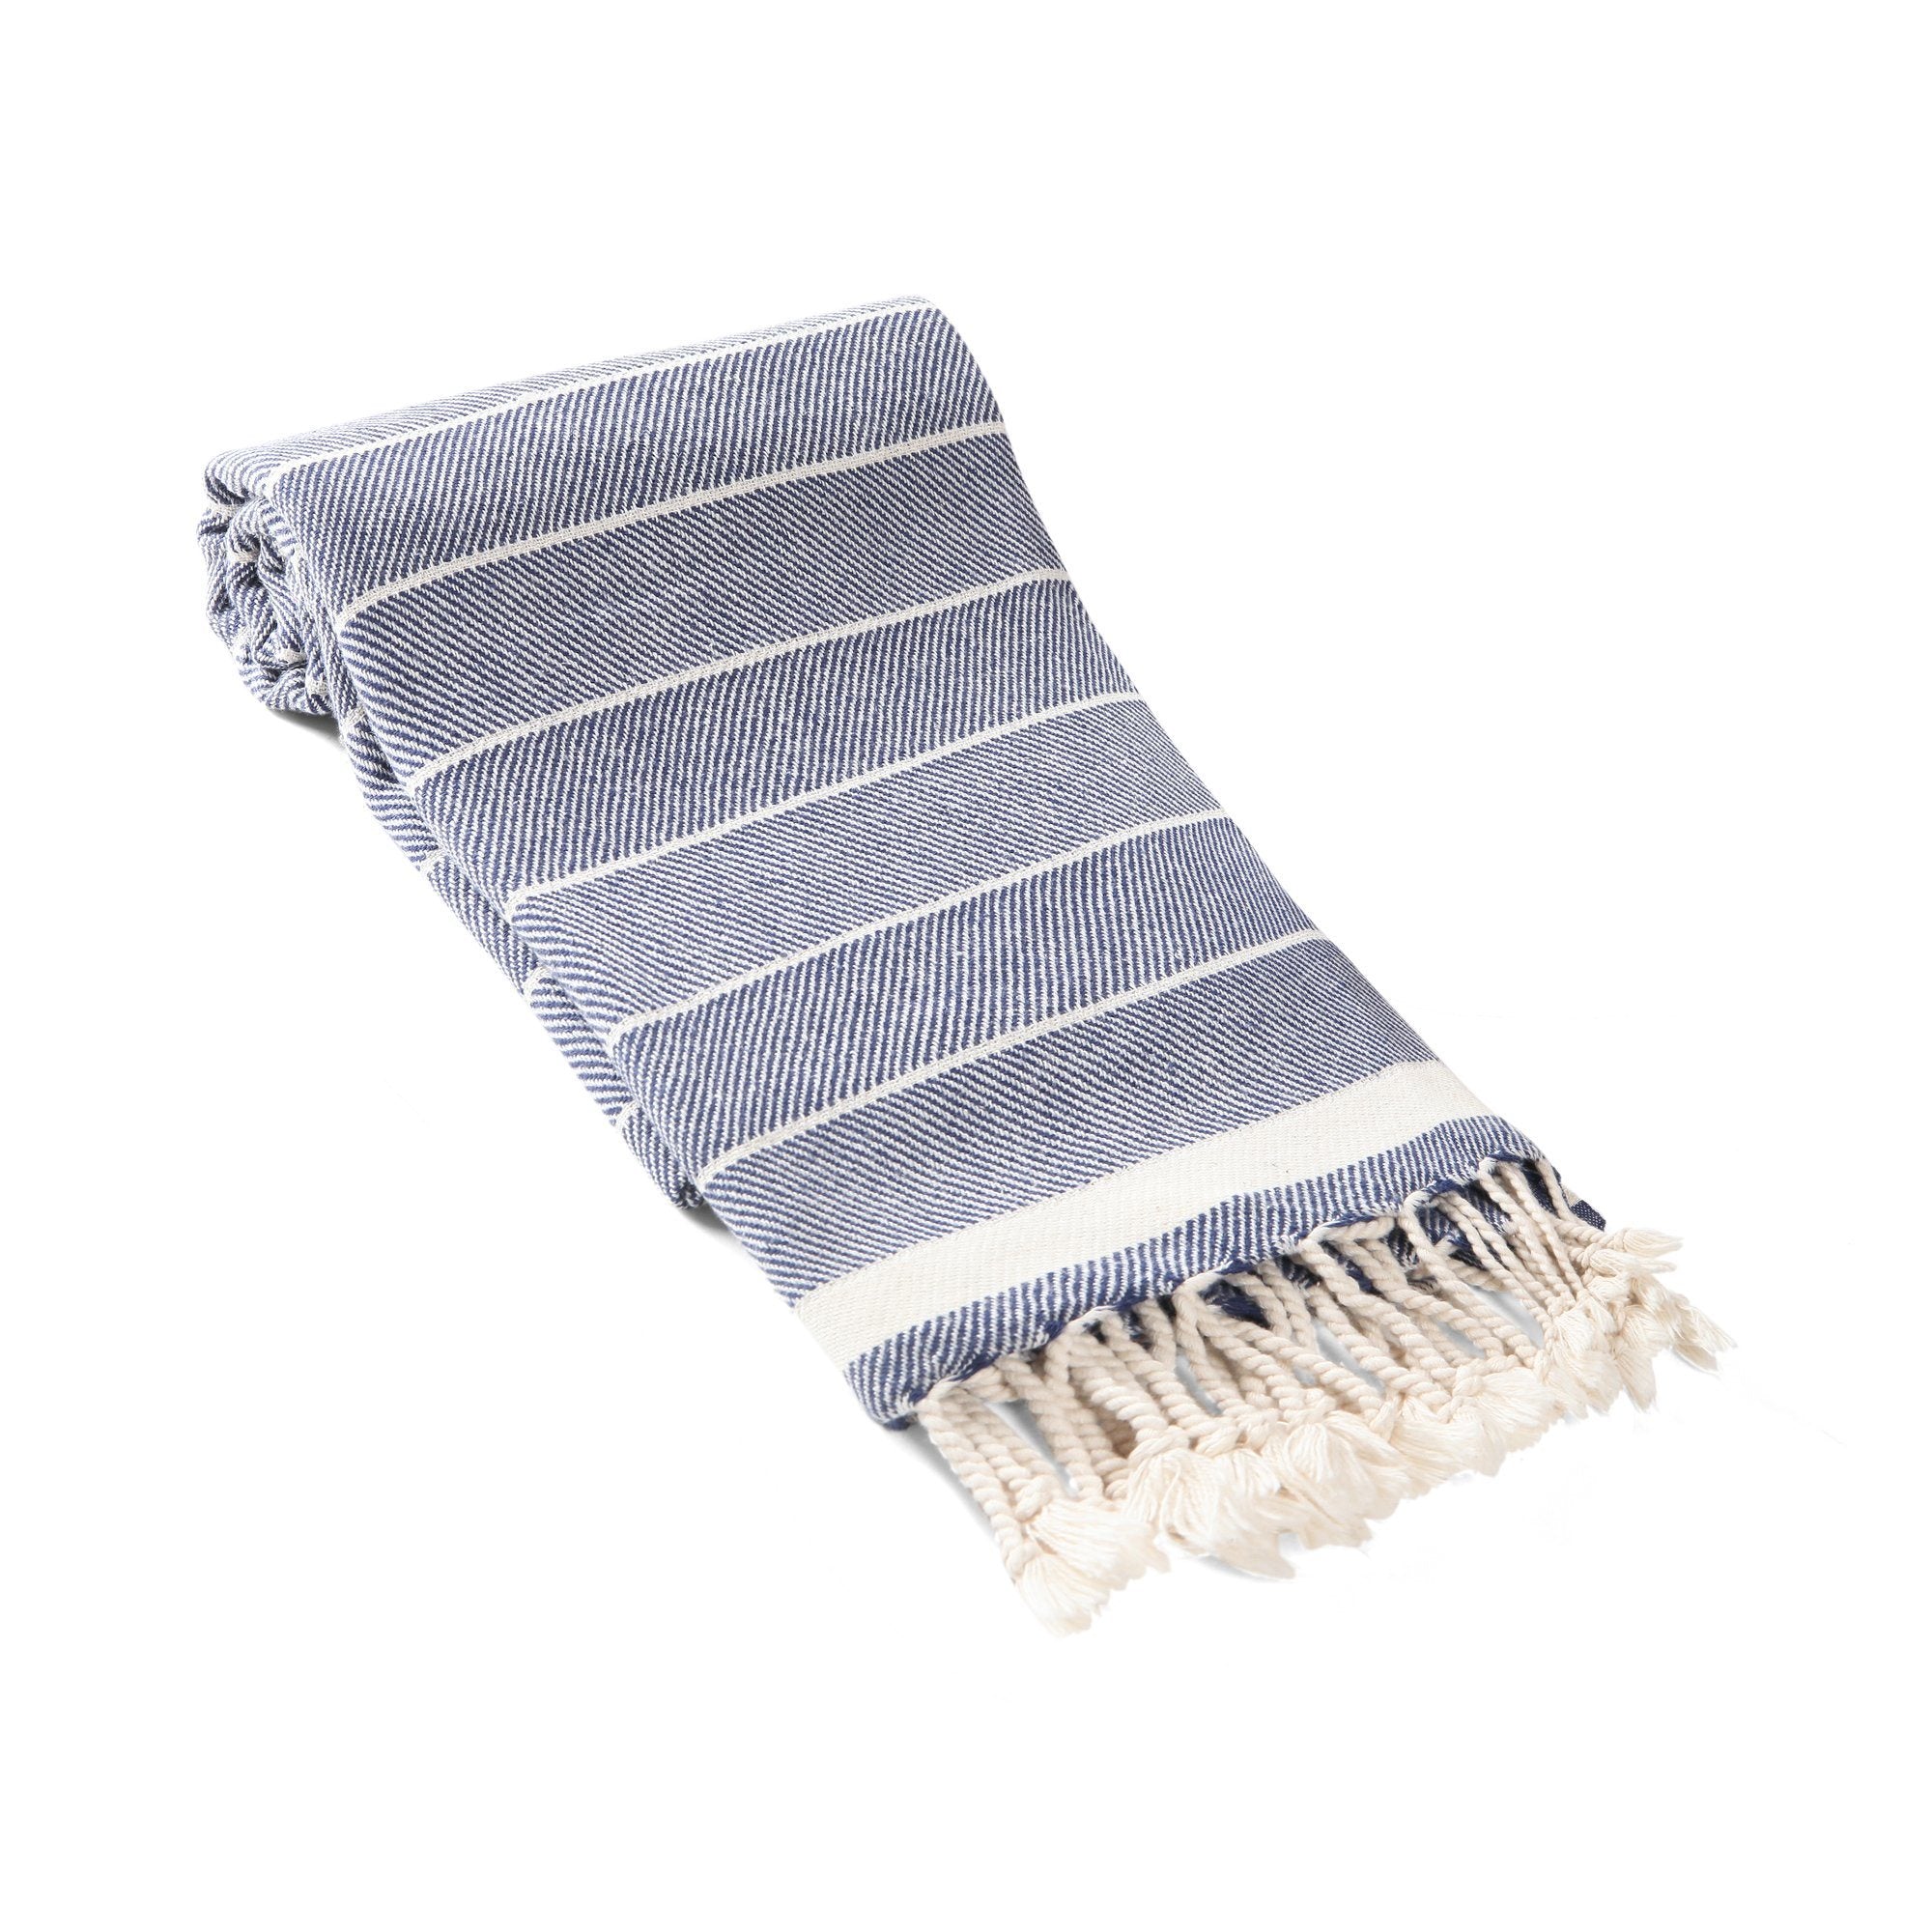 Lena Turkish Towel / Throw - Olive and Linen